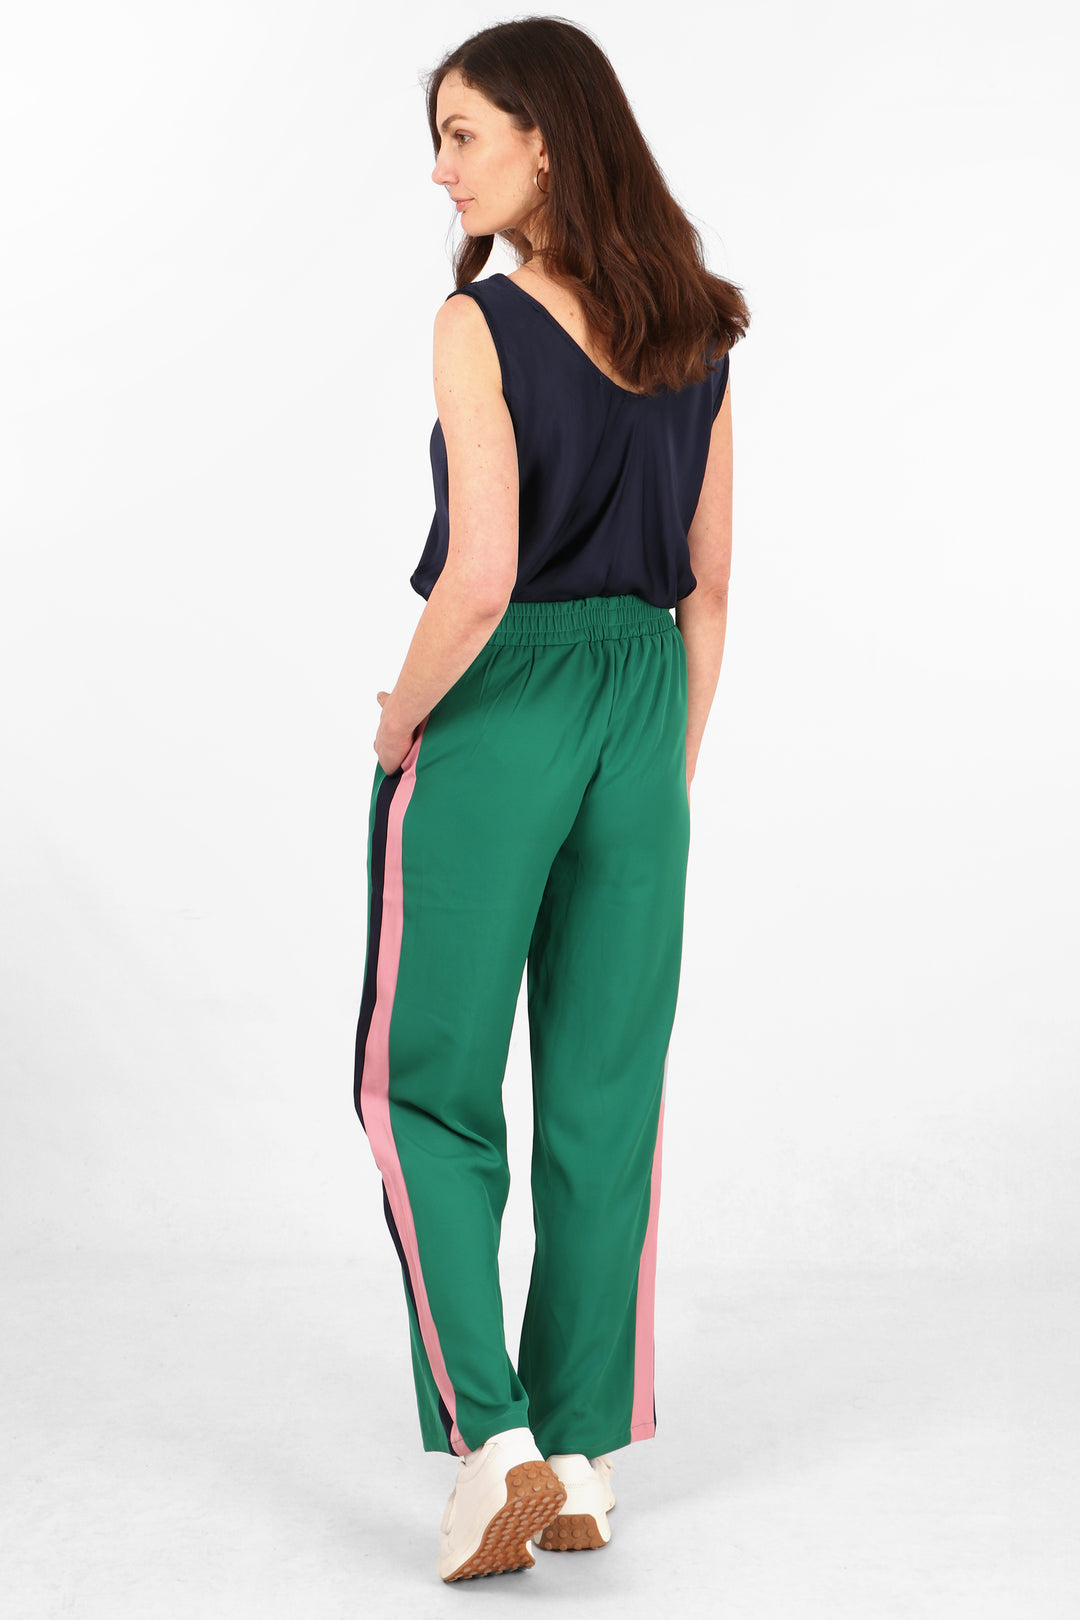 model showing the back of the green trousers, showing the stripes on both sides 